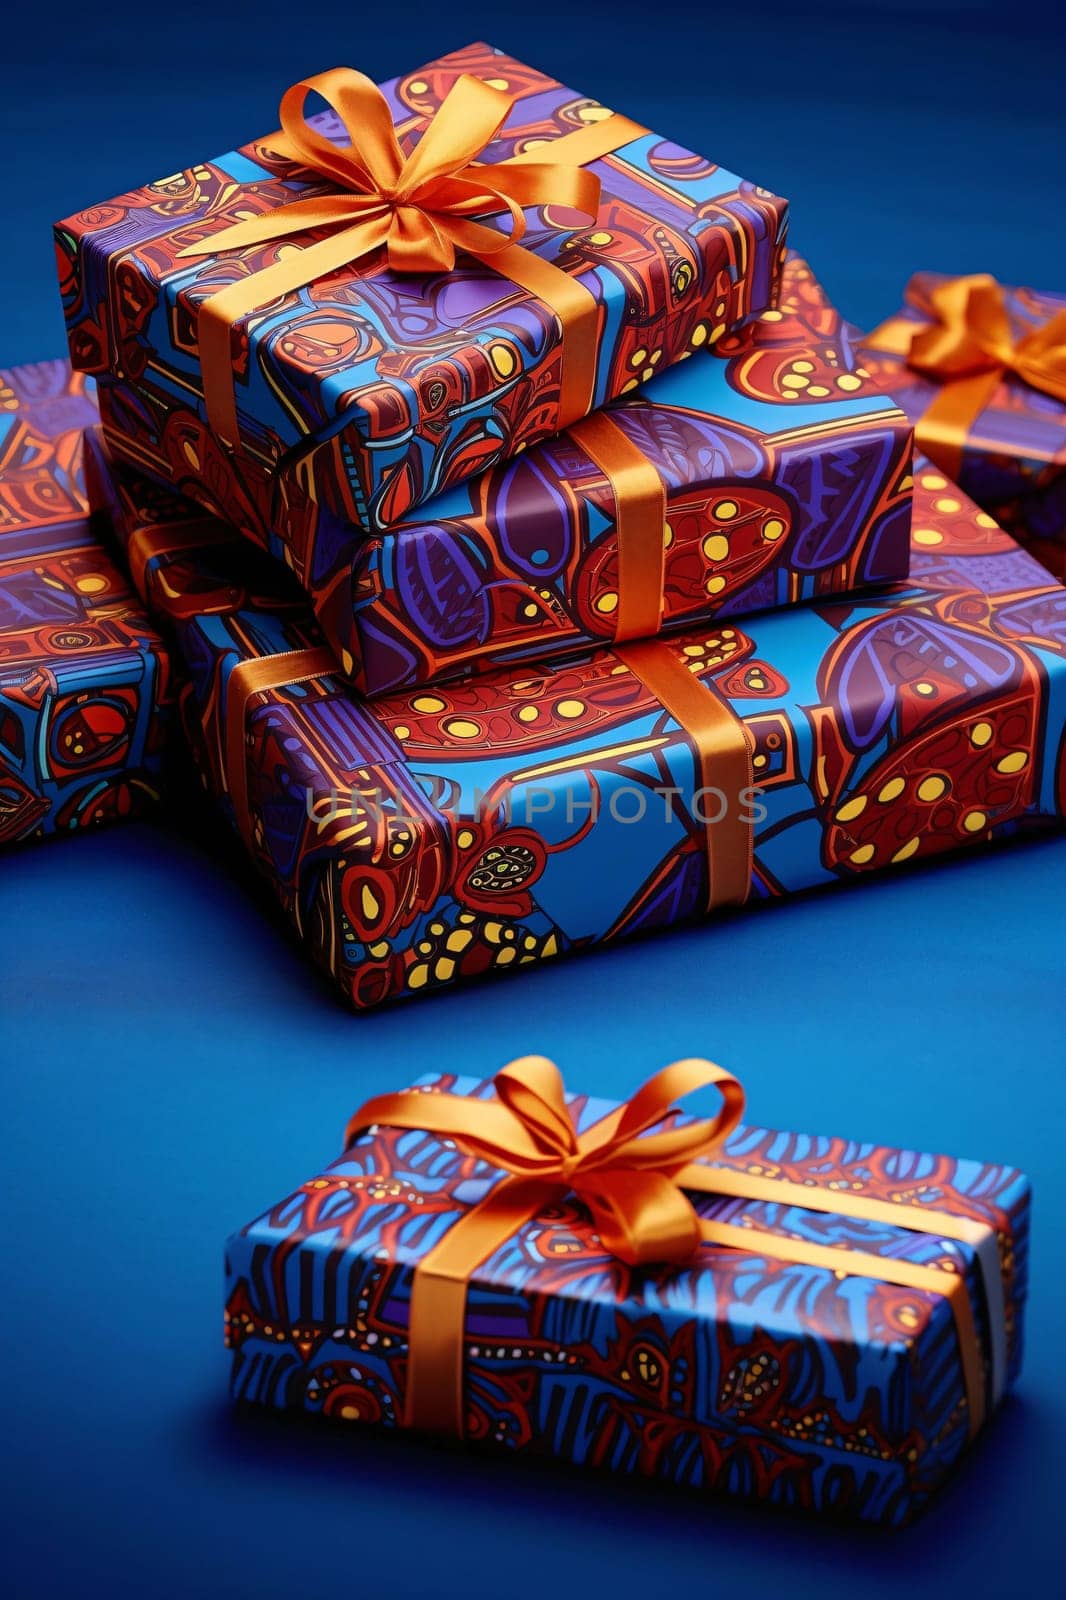 Blue boxes, gifts with red decorations, orange ribbons on a navy blue background. Gifts as a day symbol of present and love. by ThemesS